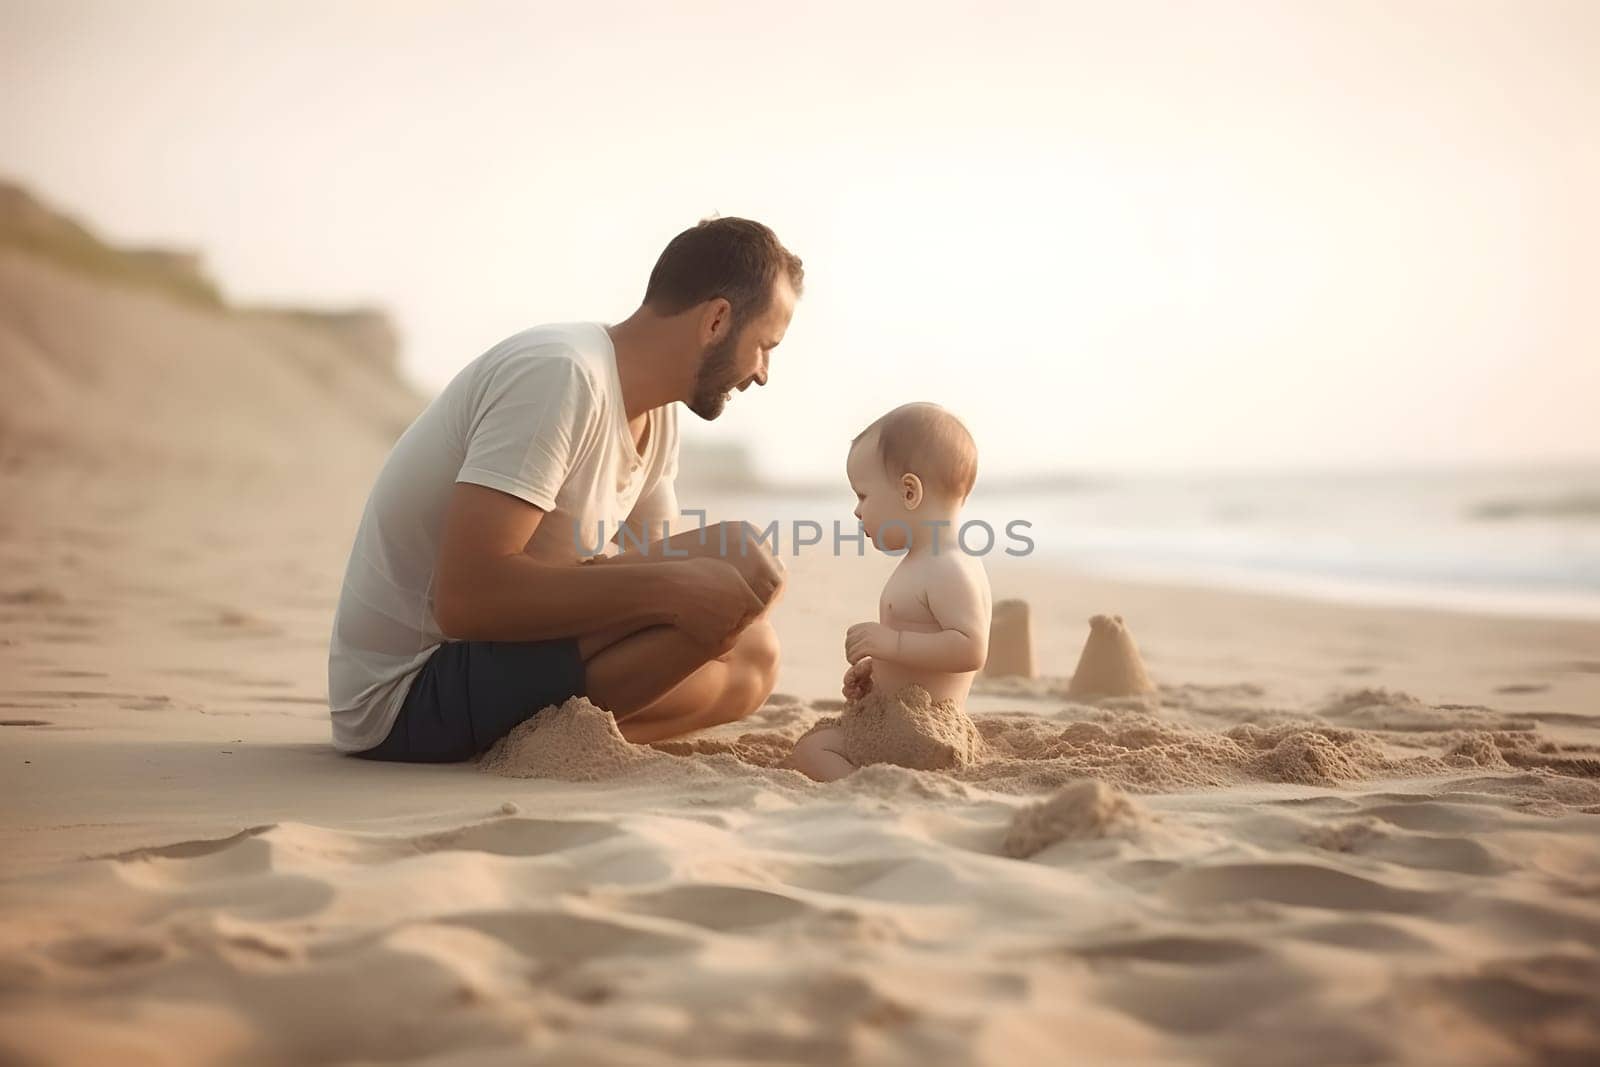 Fathers day. Dad and baby son playing together on sandy beach. Neural network generated in May 2023. Not based on any actual person, scene or pattern.